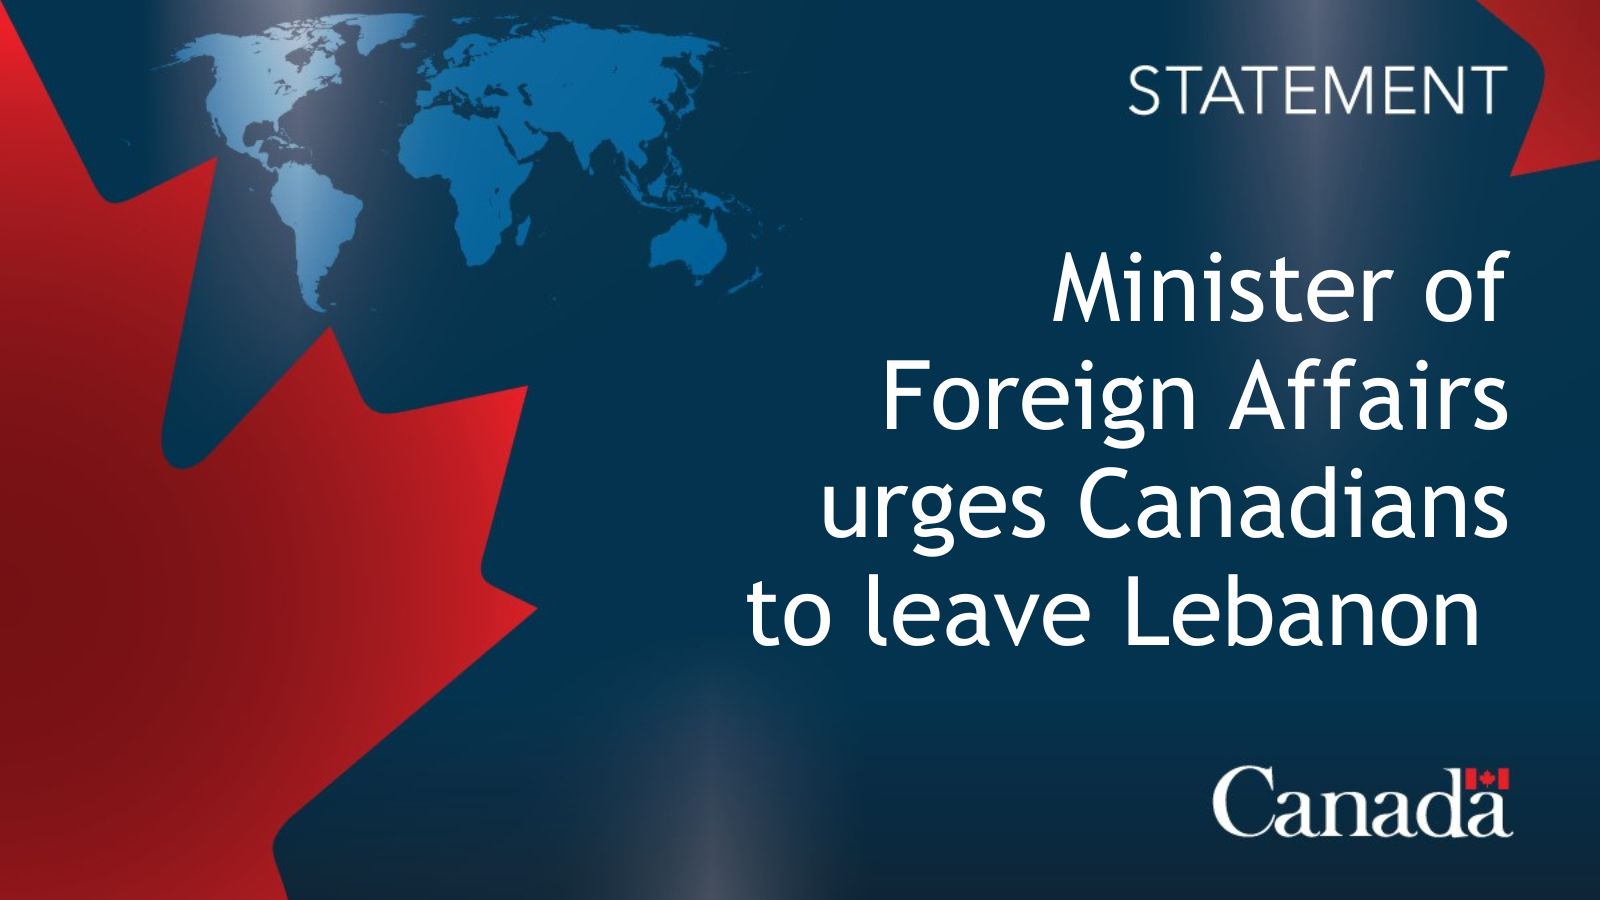 Minister of Foreign Affairs urges Canadians to leave Lebanon while they can